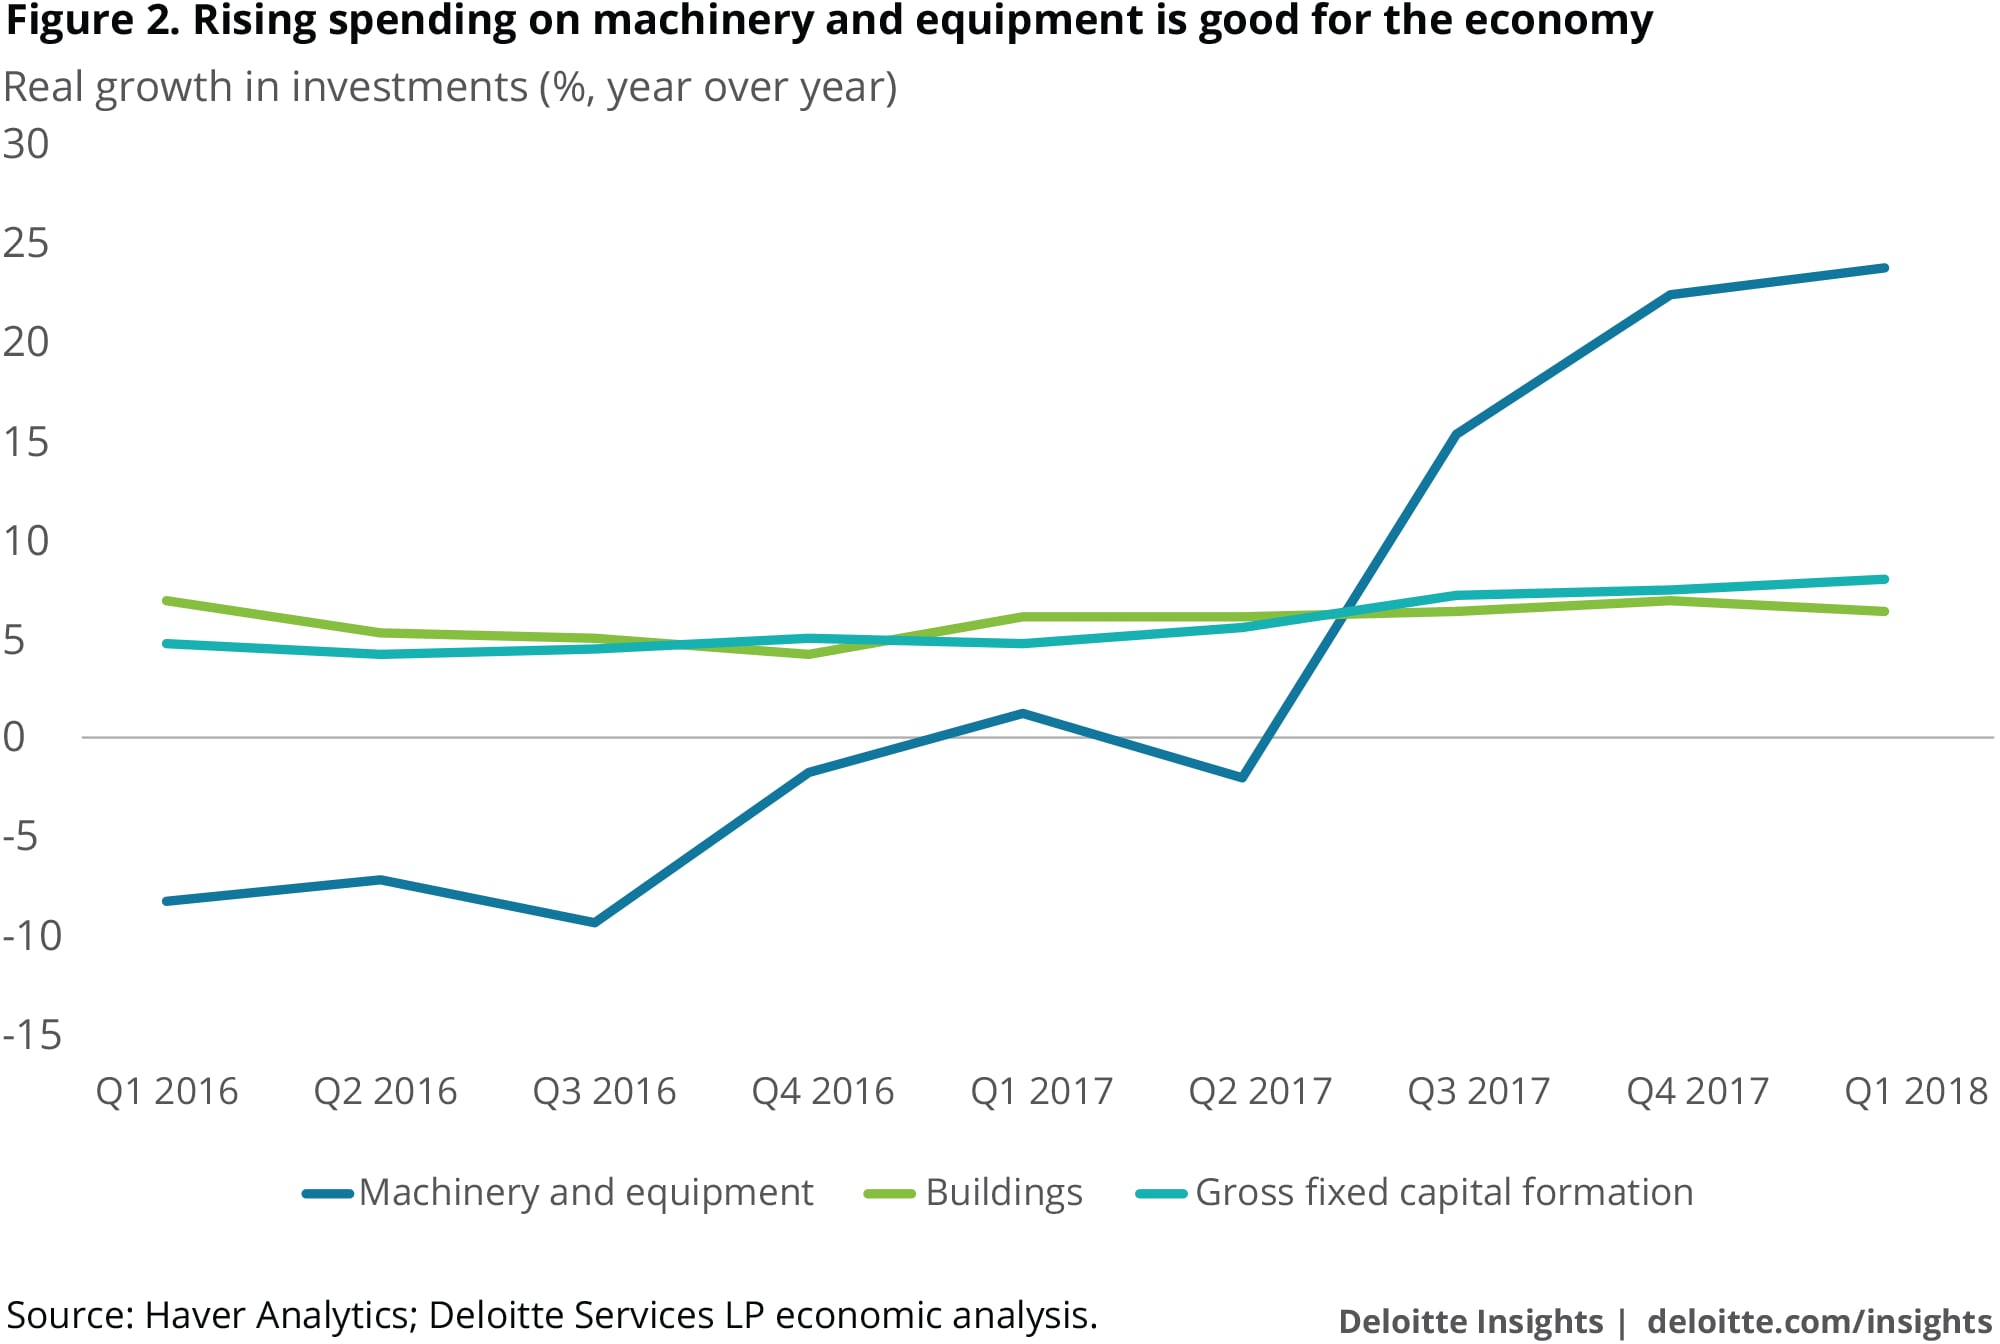 Rising spending on machinery and equipment is good for the economy